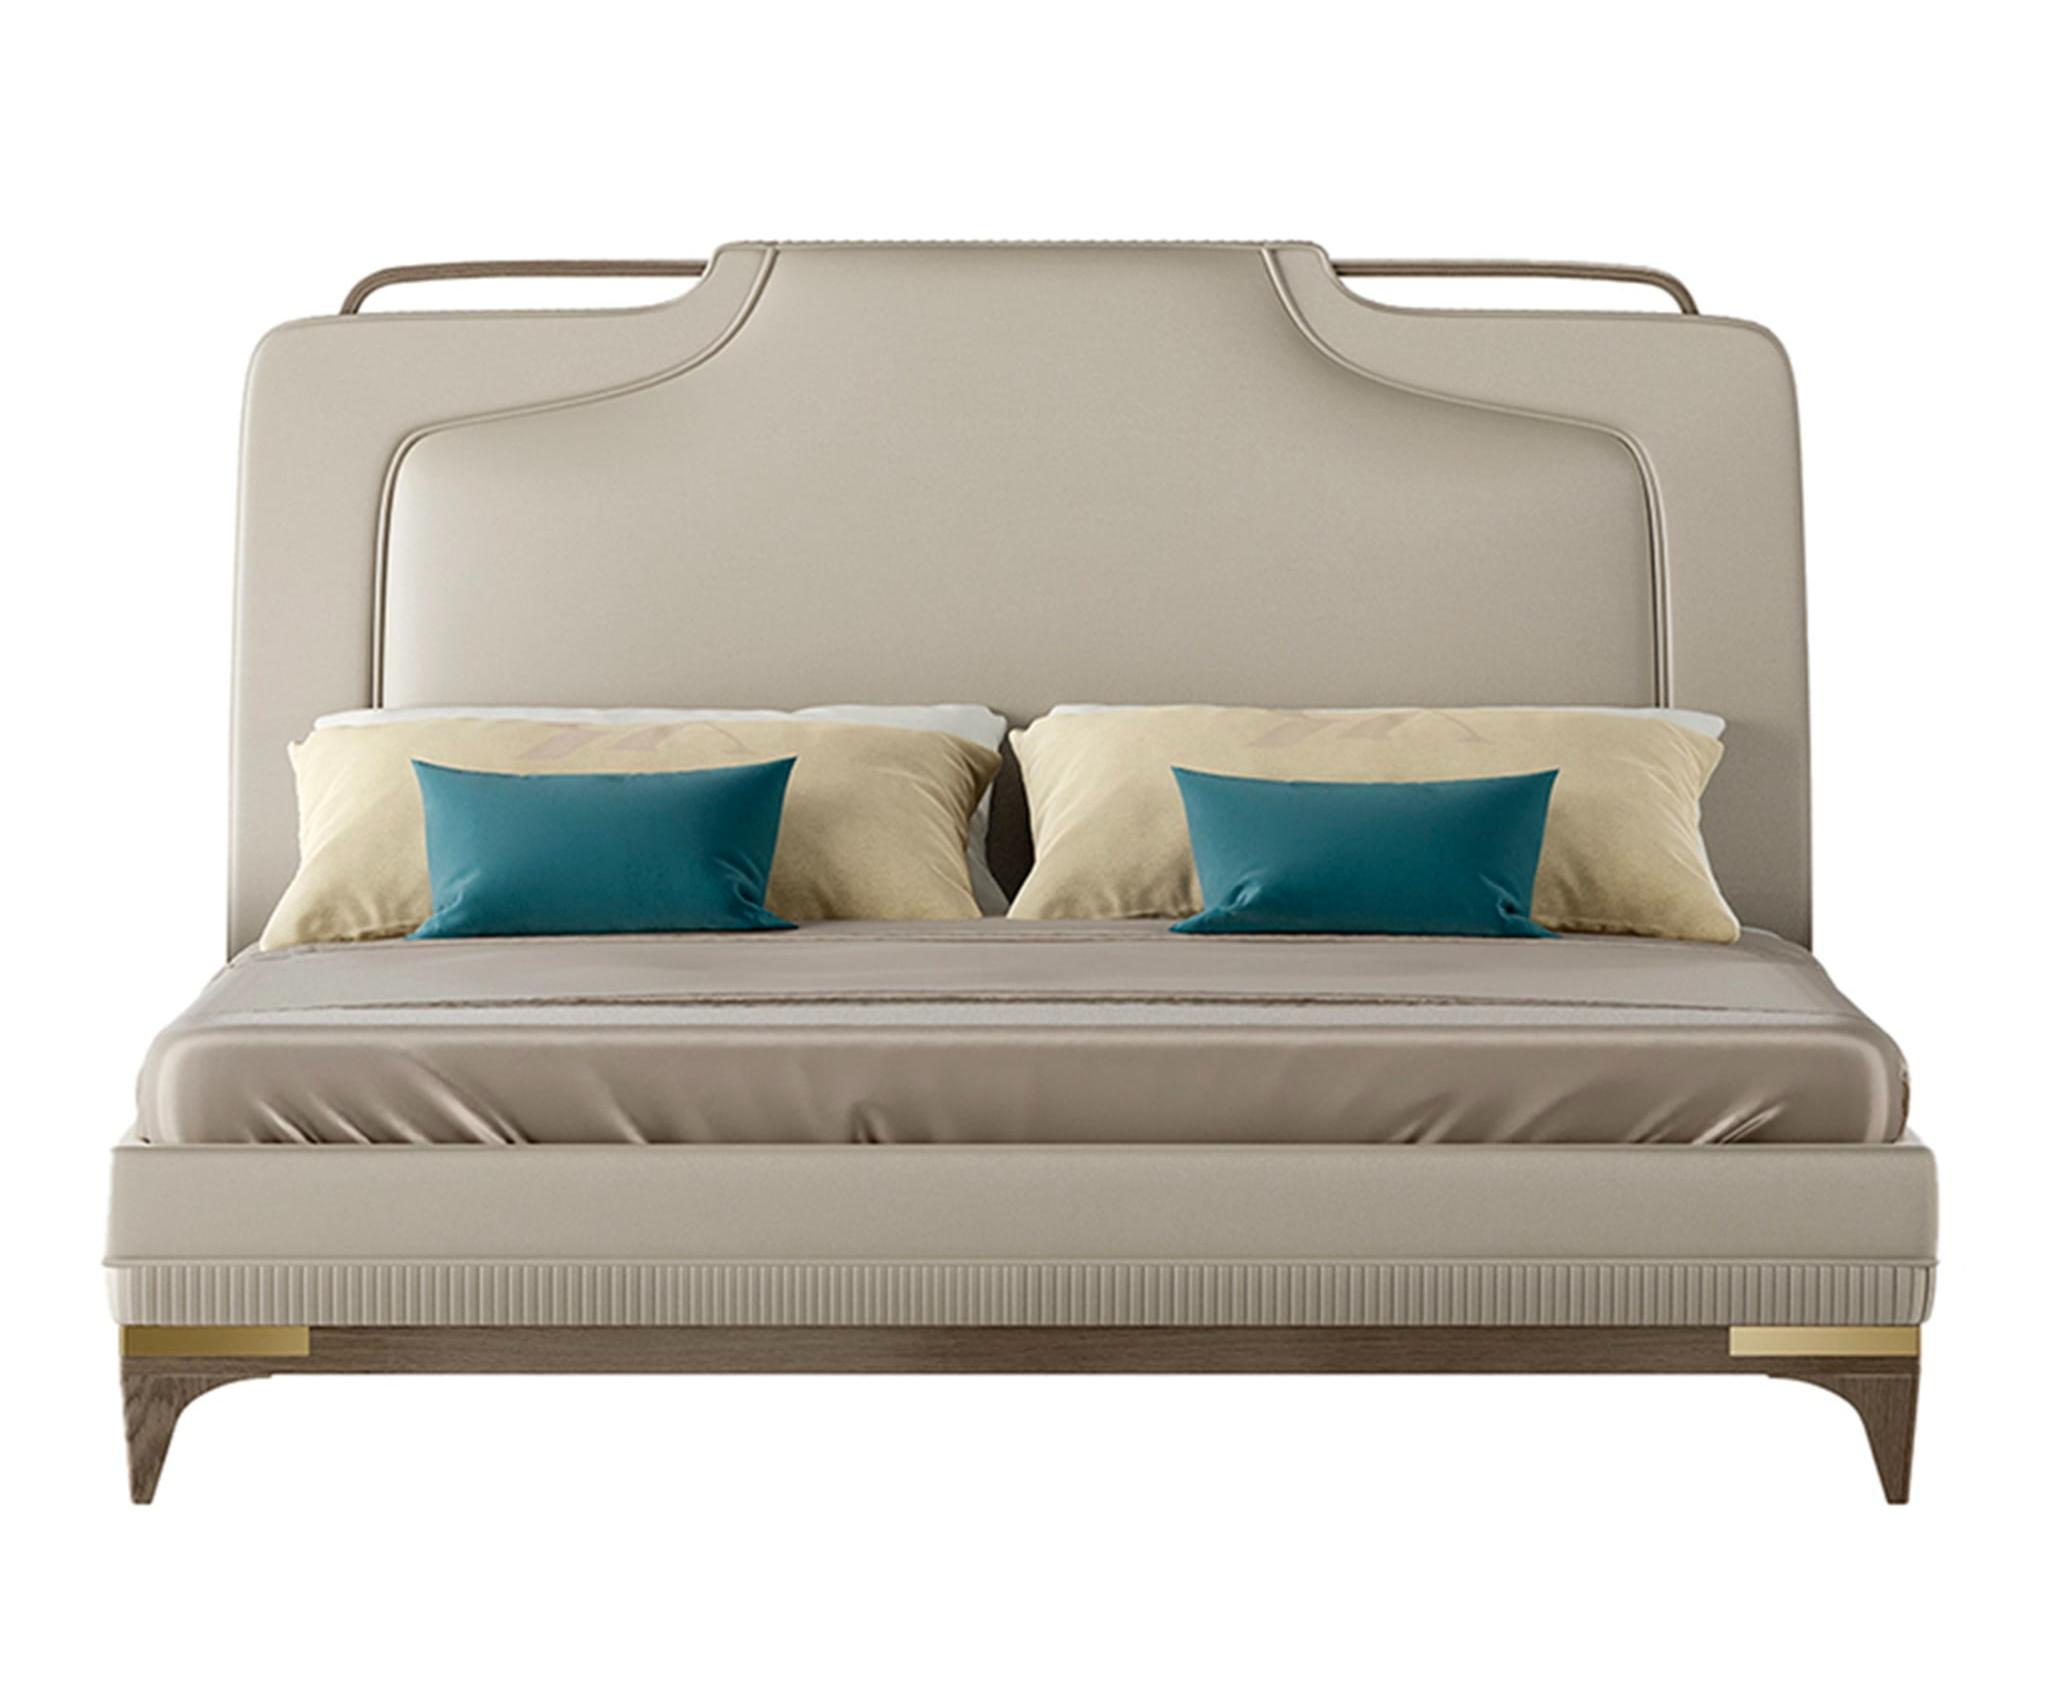 Beige Leather Bed ☞ Size: 180 x 200 cm